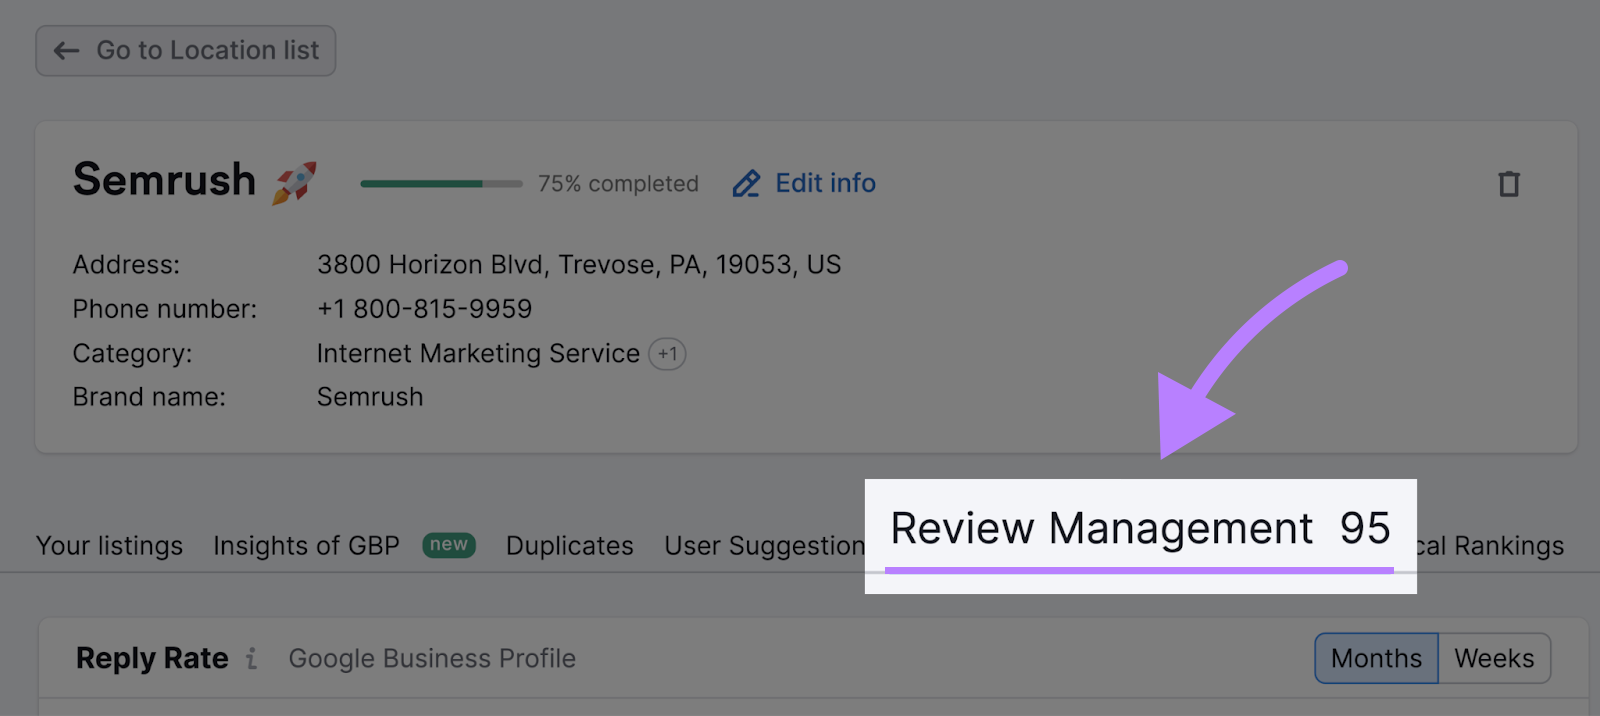 “Review Management” button highlighted